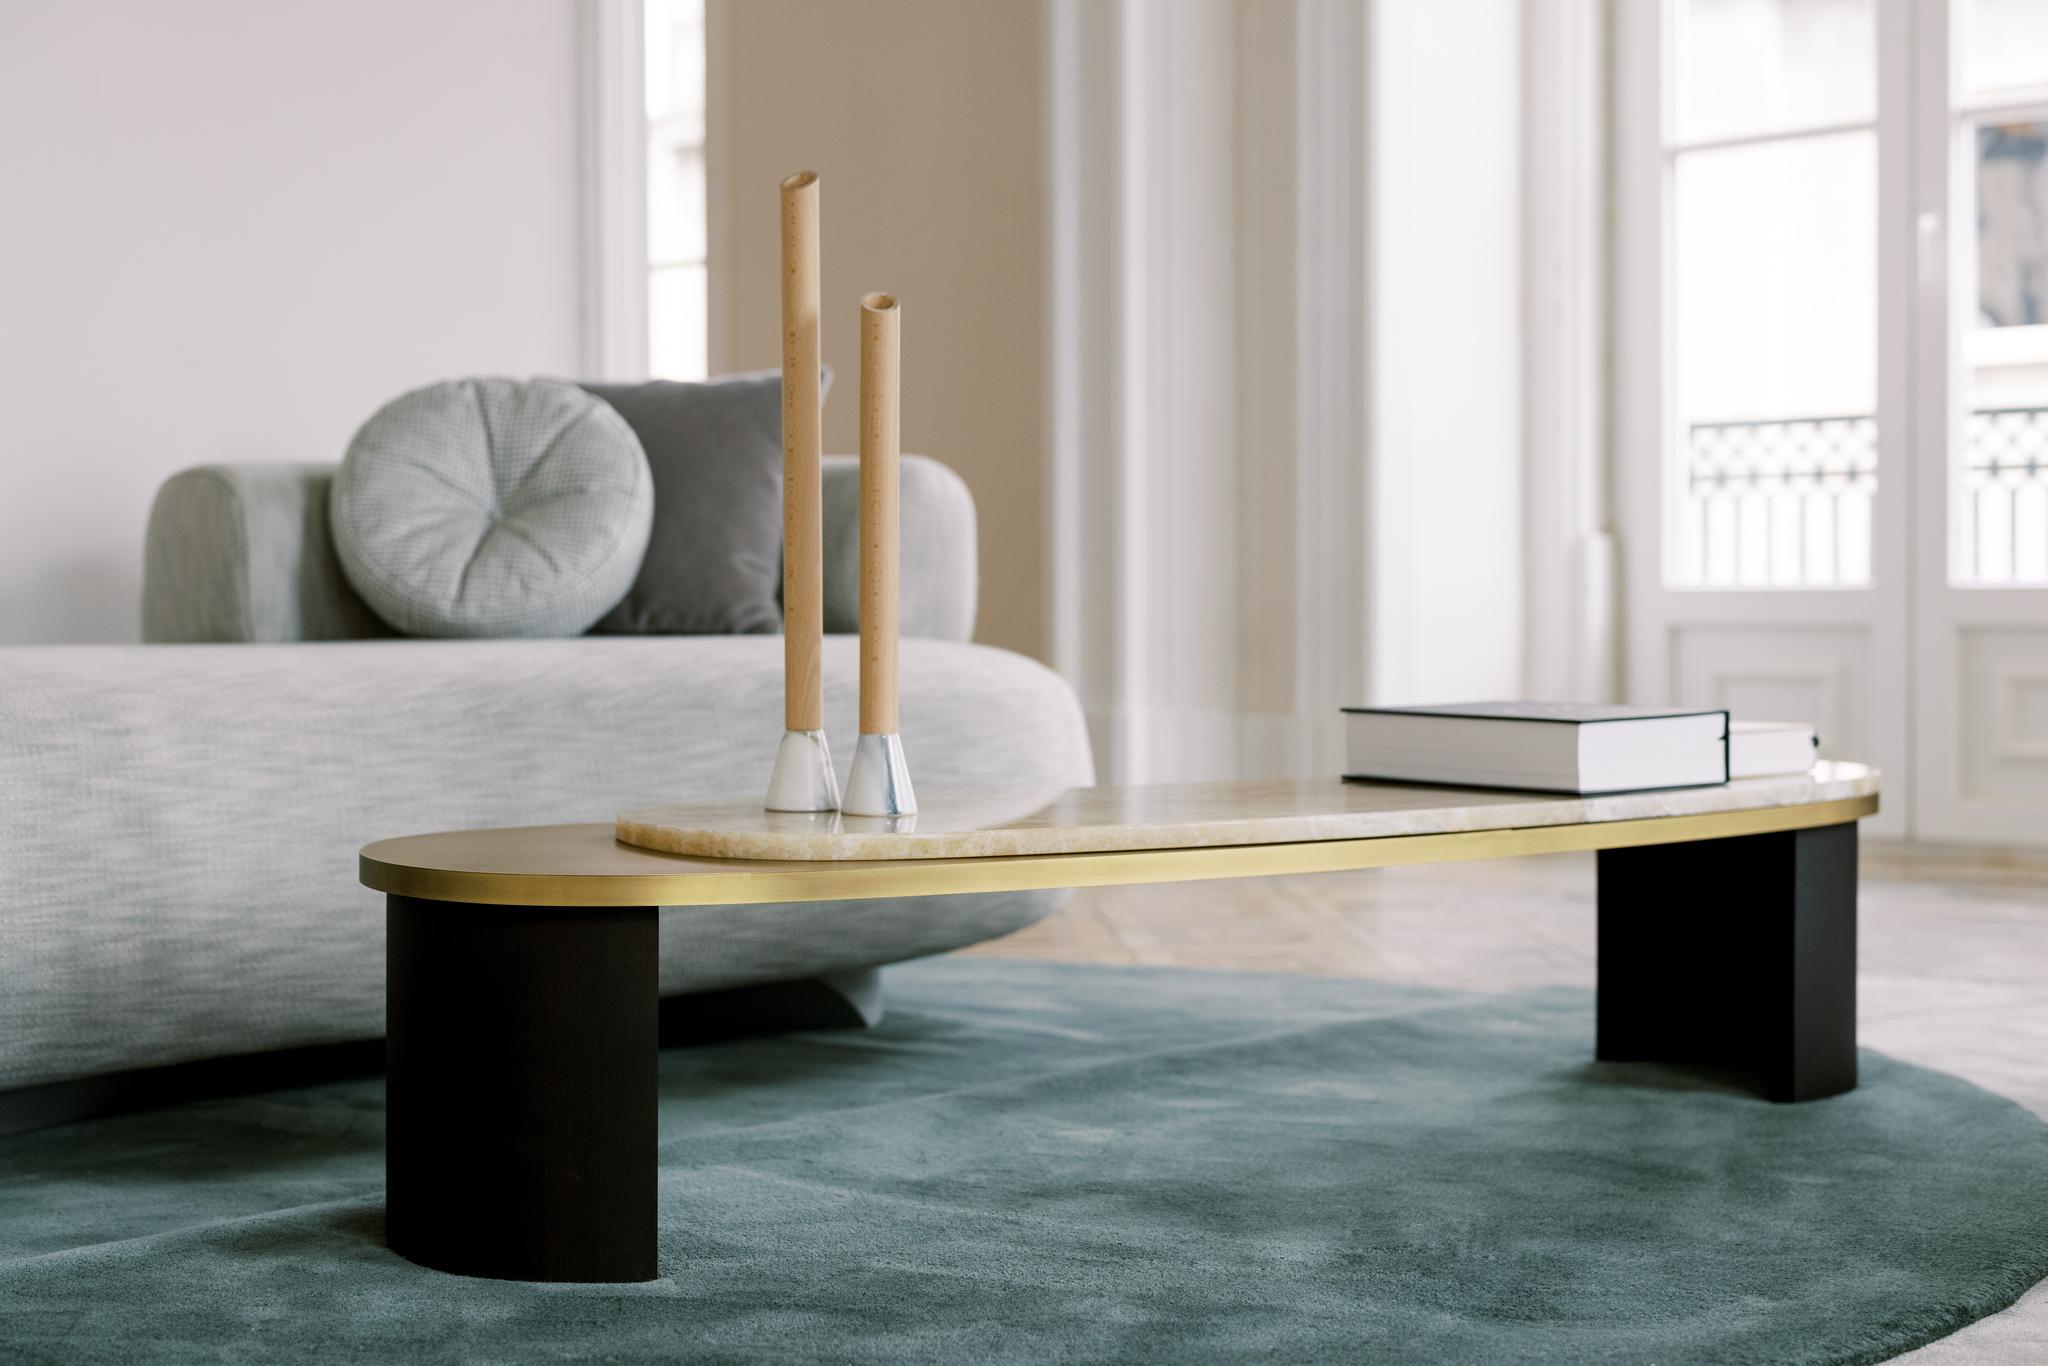 Modern Armona Coffee Table, Onyx Stainless Steel, Handmade Portugal Greenapple In New Condition For Sale In Lisboa, PT